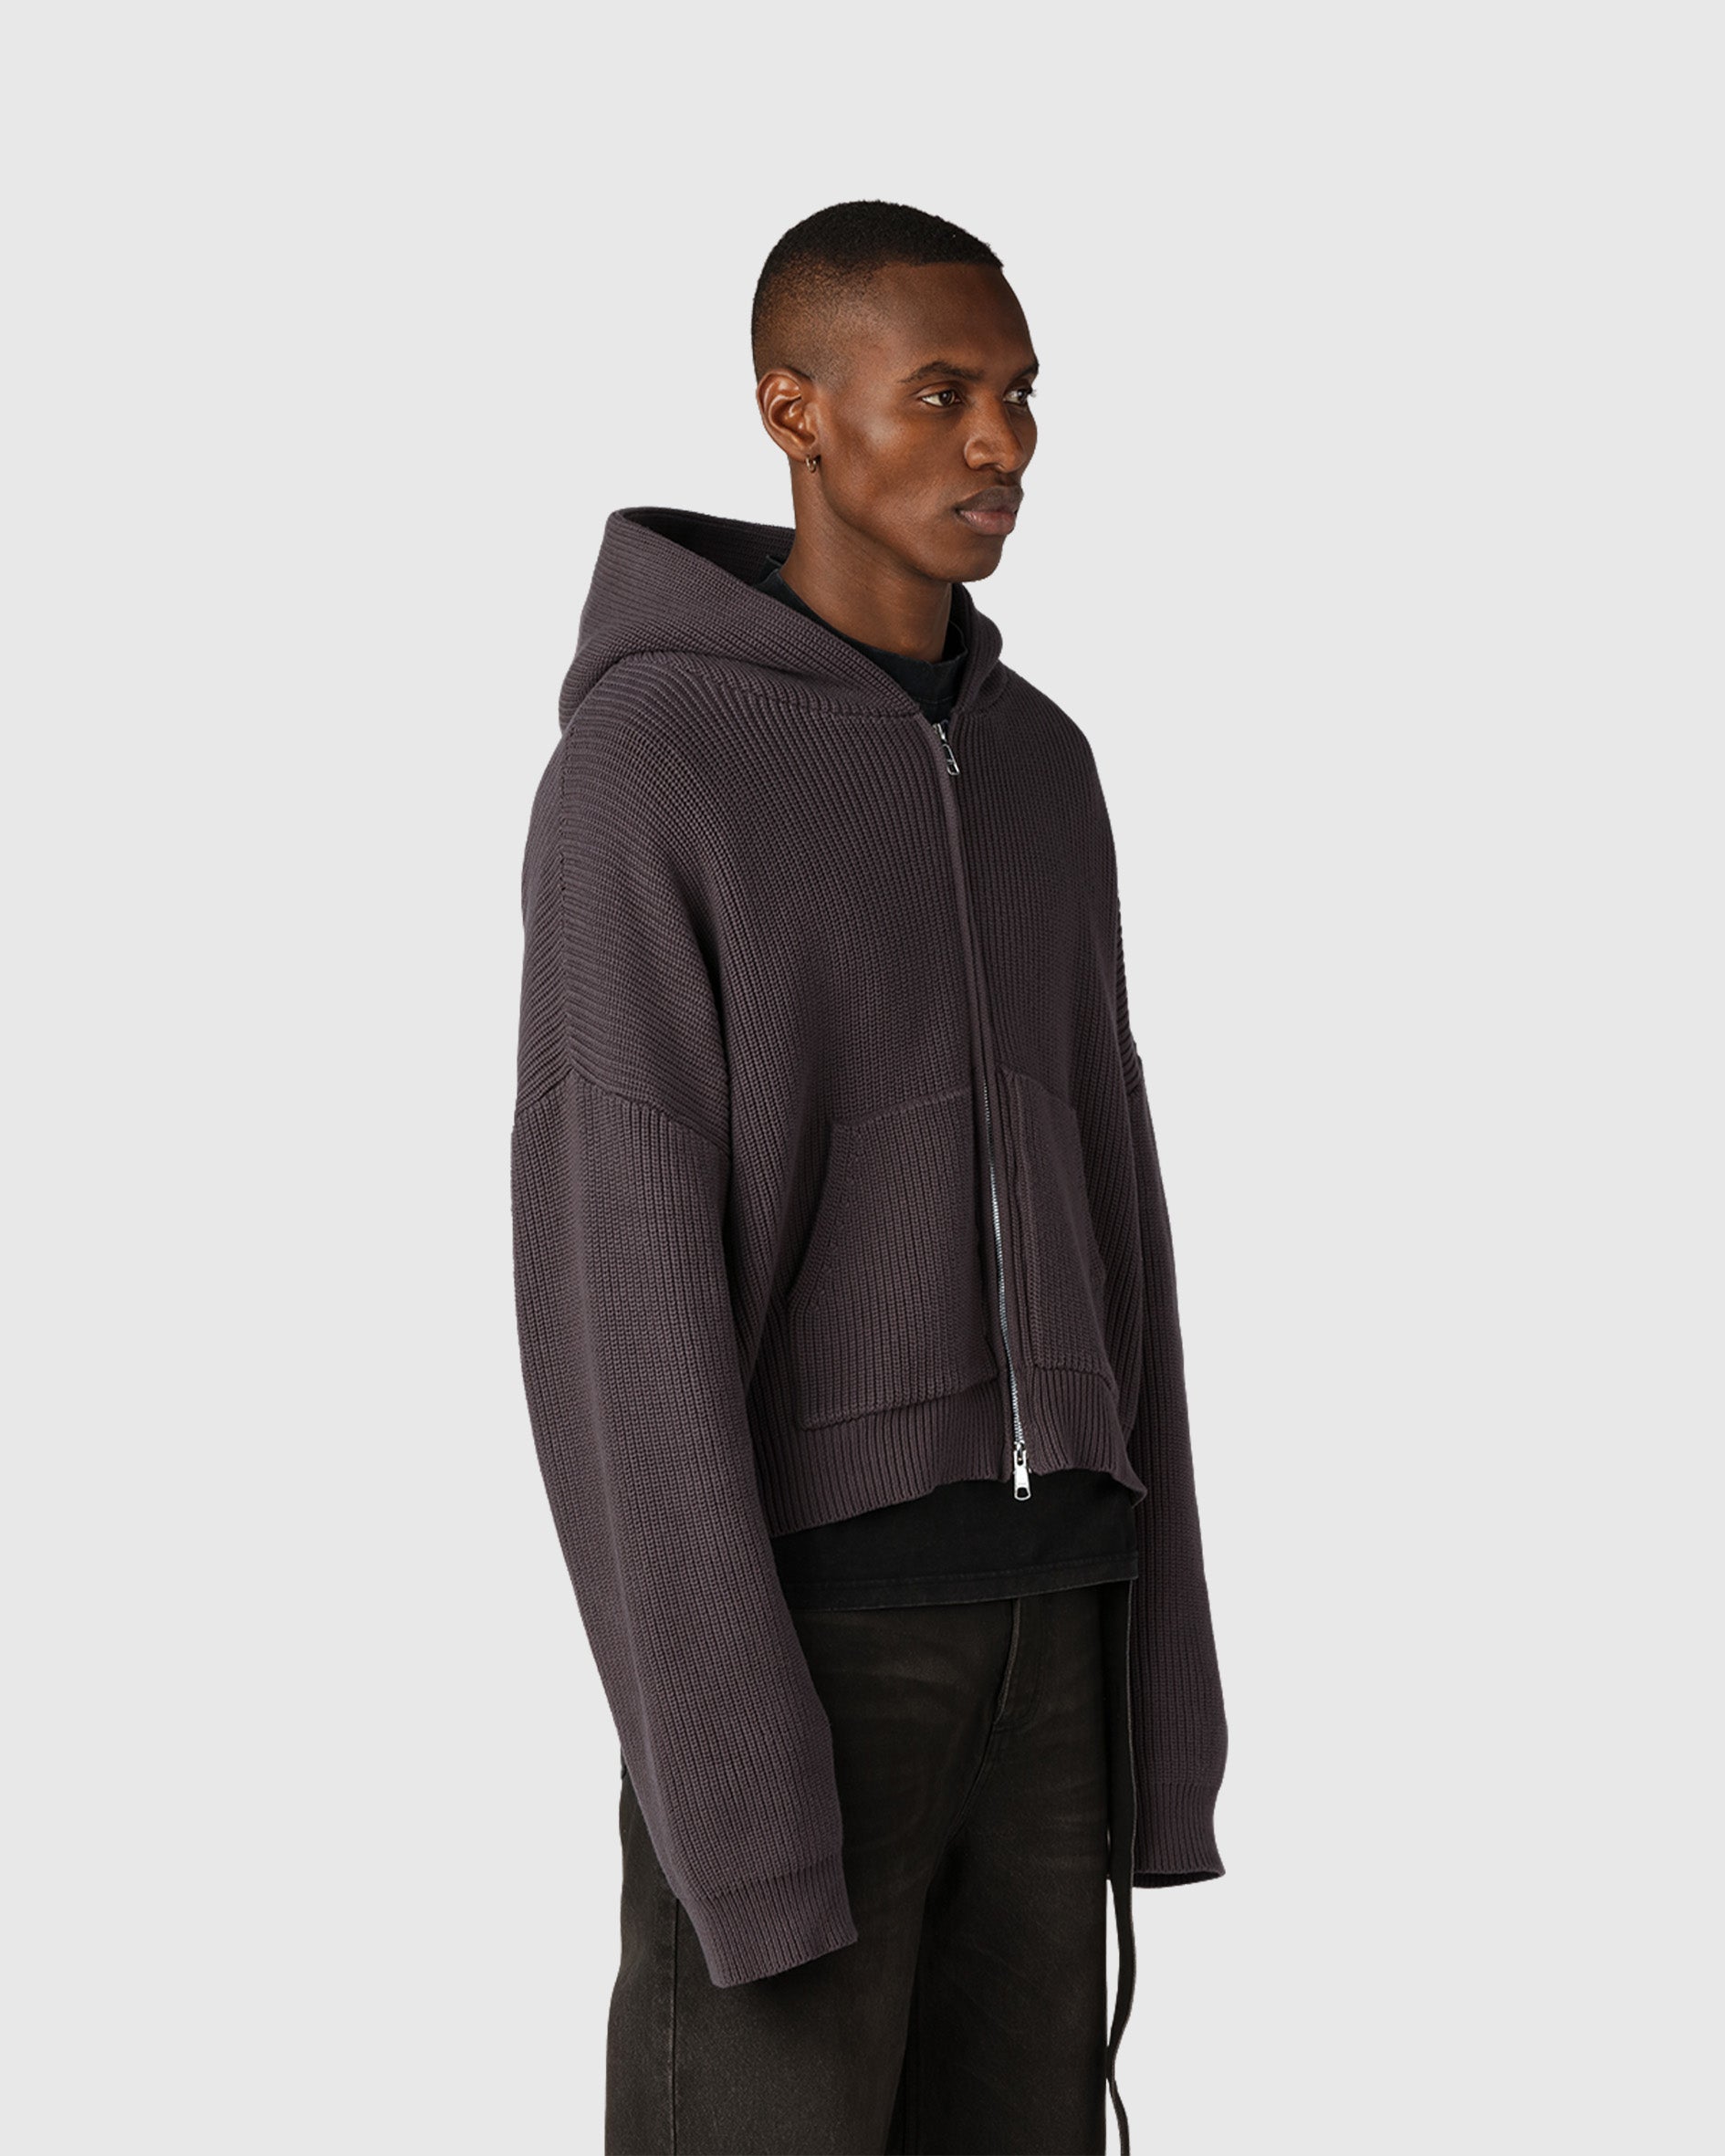 CROPPED HOODIE IN GRAPHITE